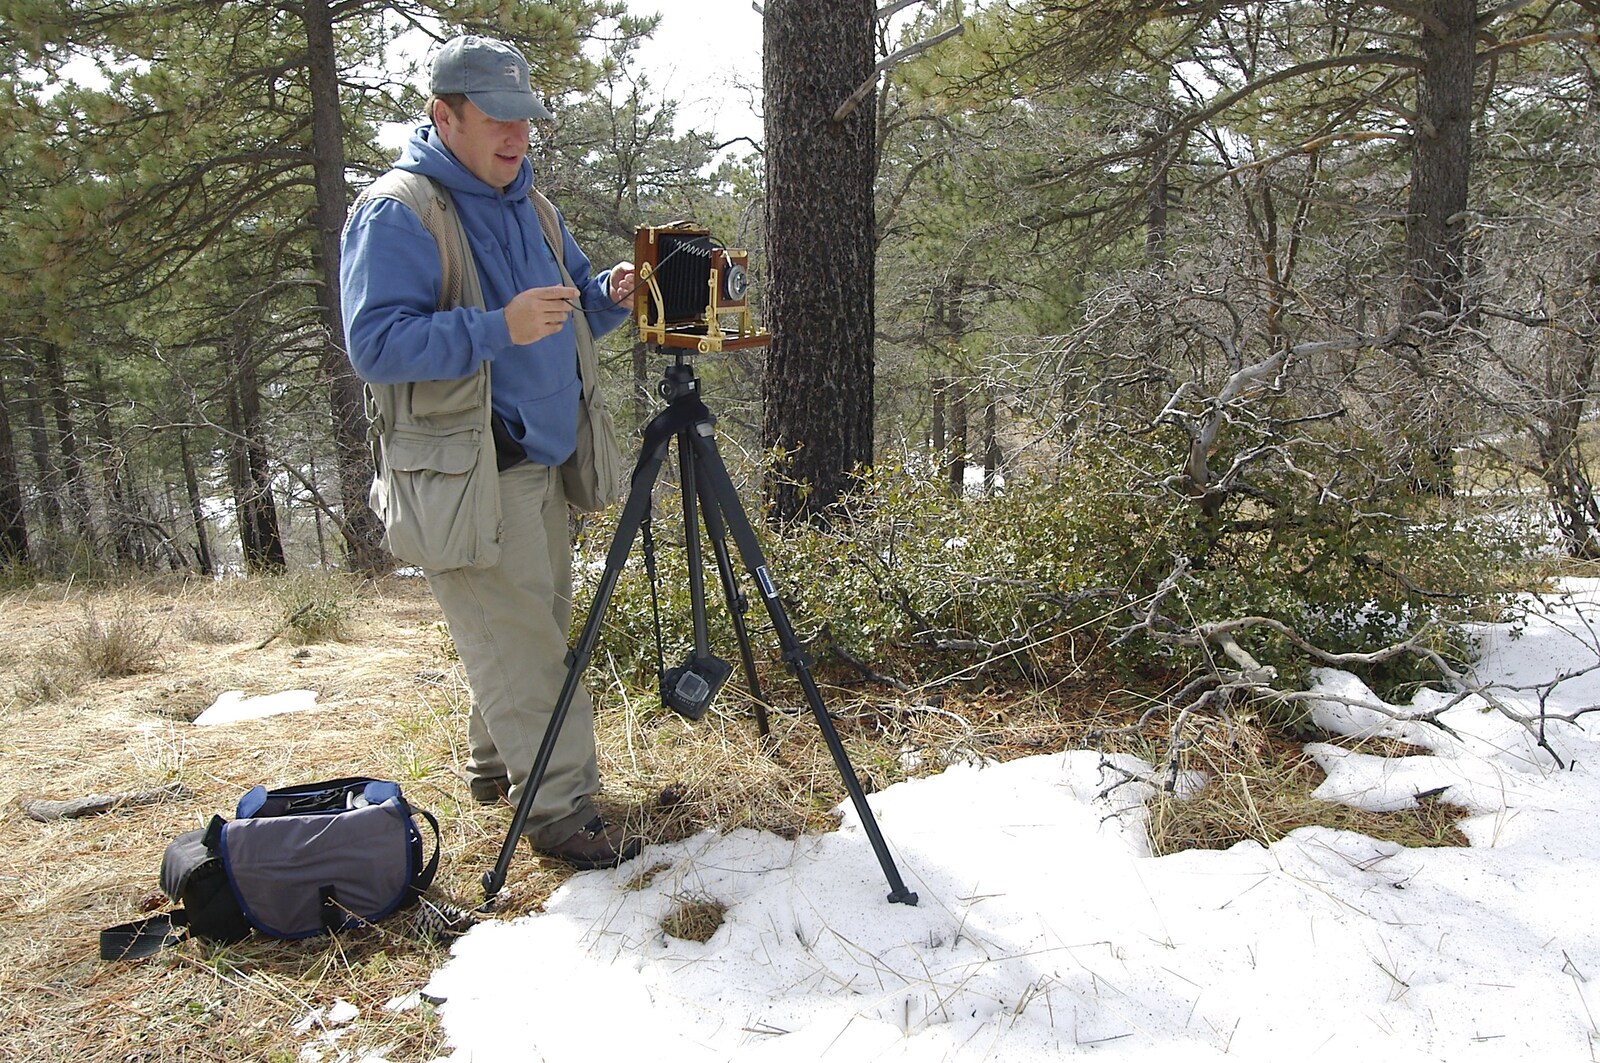 Ken sets up the field camera from California Snow: San Bernadino State Forest, California, US - 26th March 2006